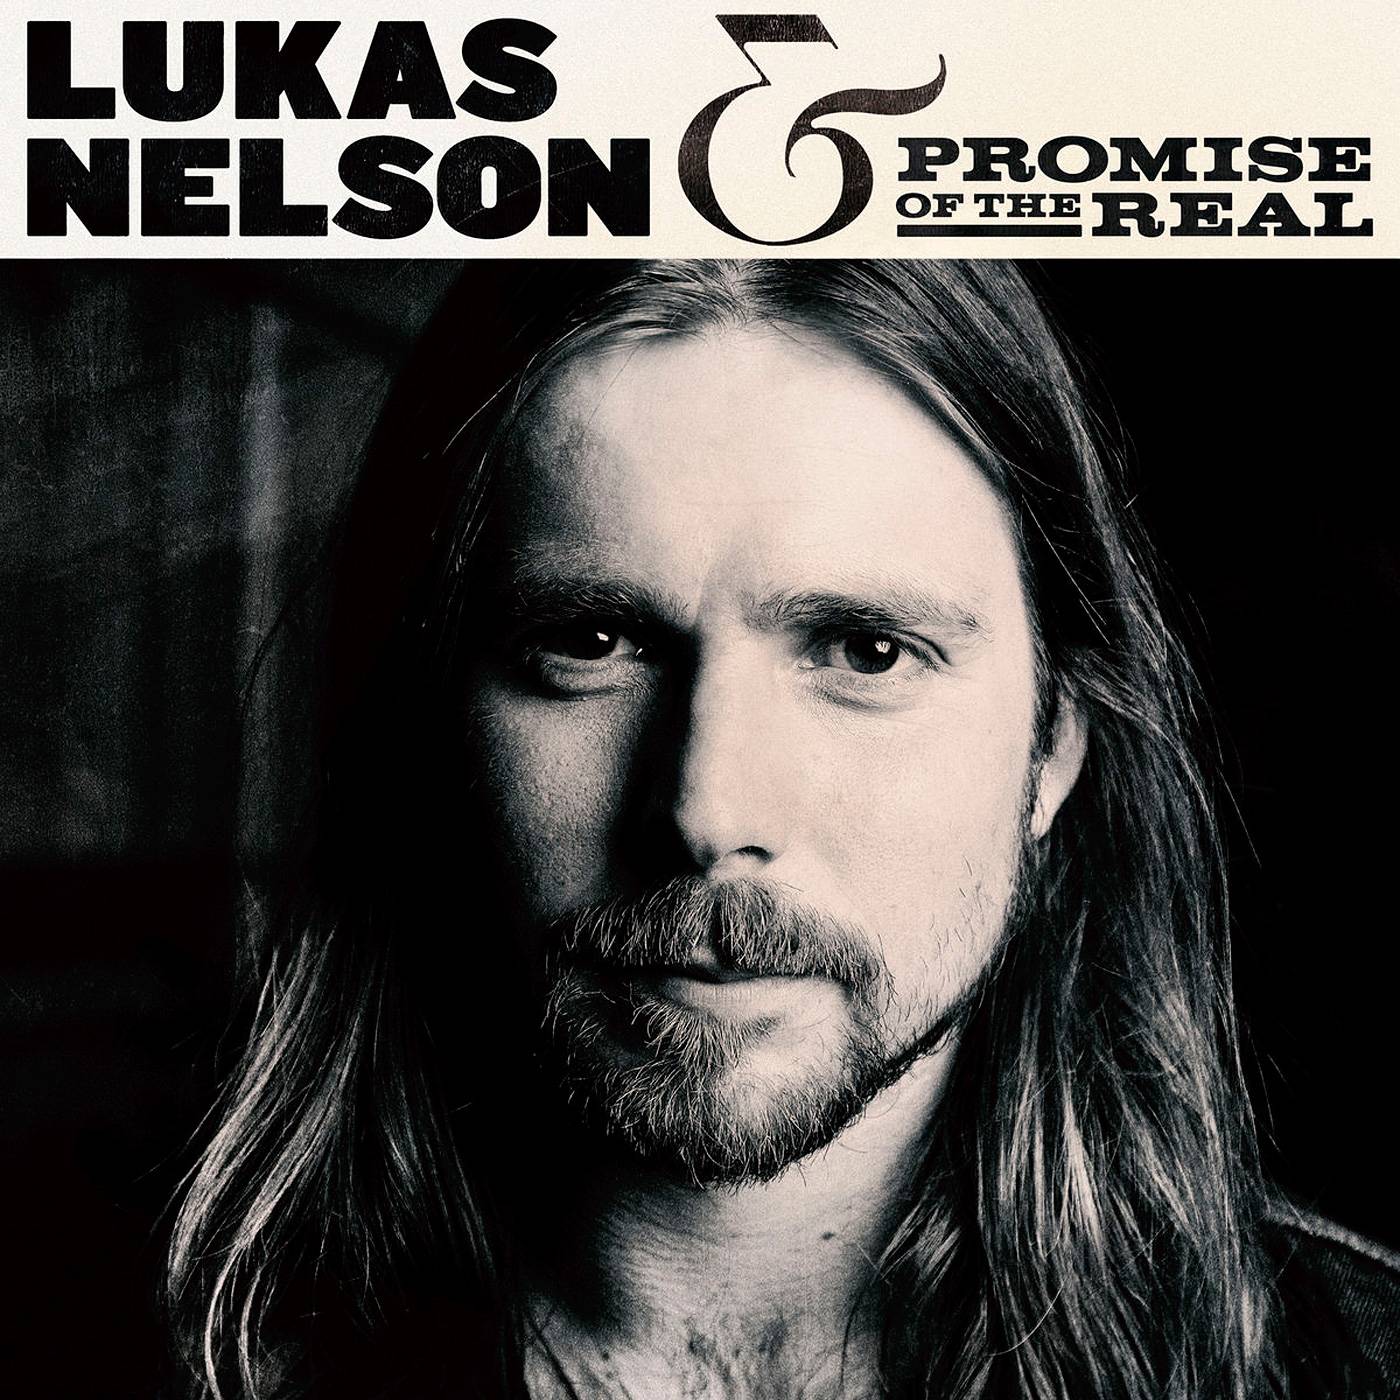 Lukas Nelson & Promise Of The Real - Lukas Nelson & Promise Of The Real (2017) [FLAC 24bit/96kHz]